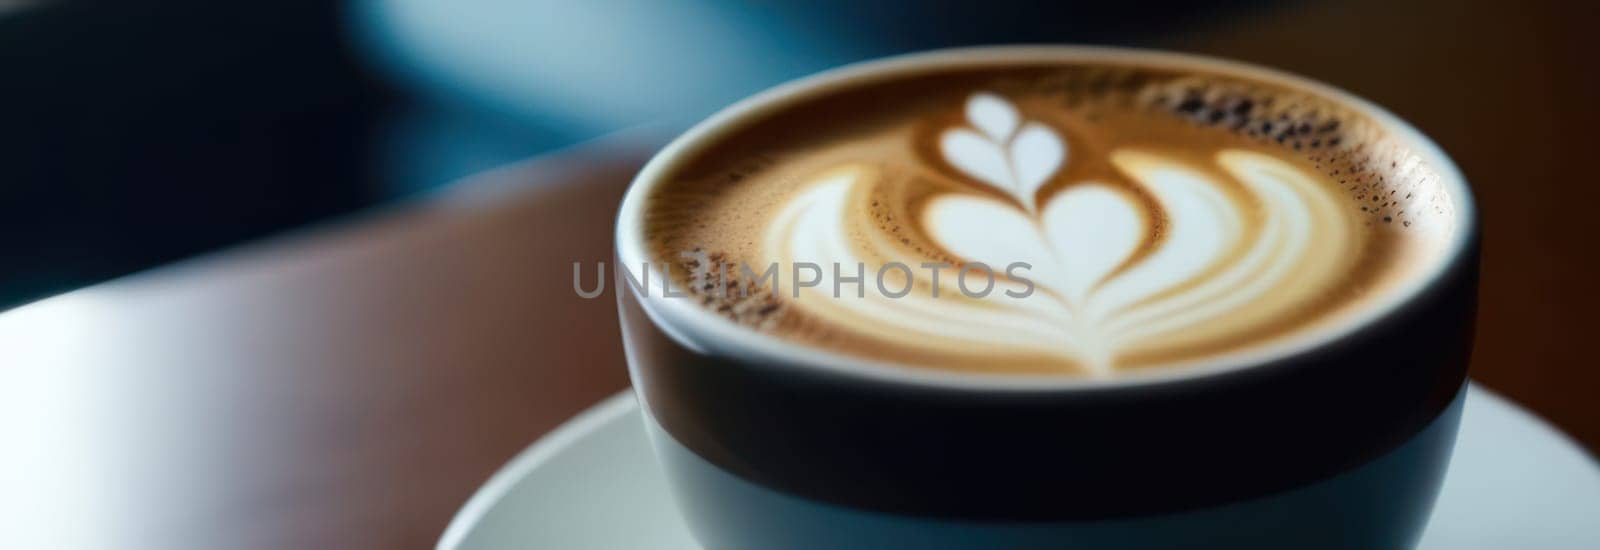 Cup of hot coffee on dark background.Long photo banner for website header design with copy space. Cafe menu concept idea background. by Angelsmoon